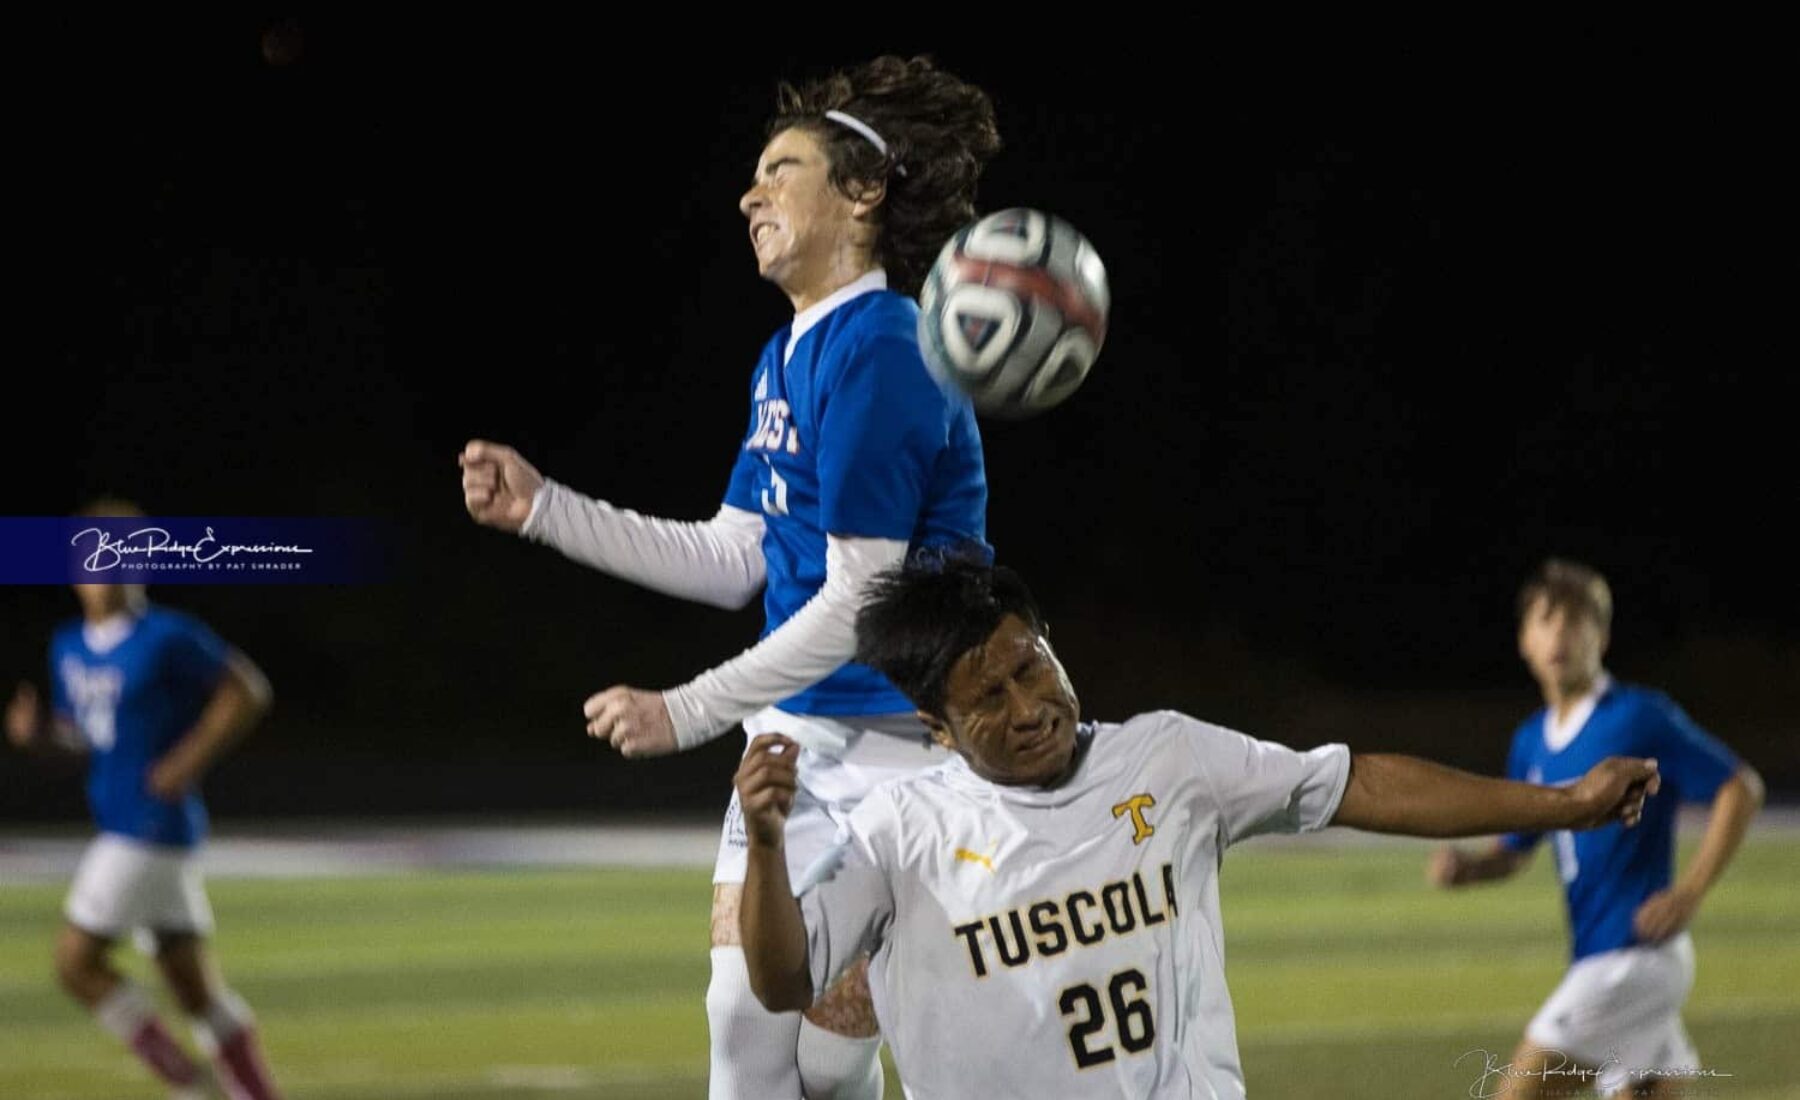 Soccer: West Henderson Battles Tuscola to a 1-1 Tie